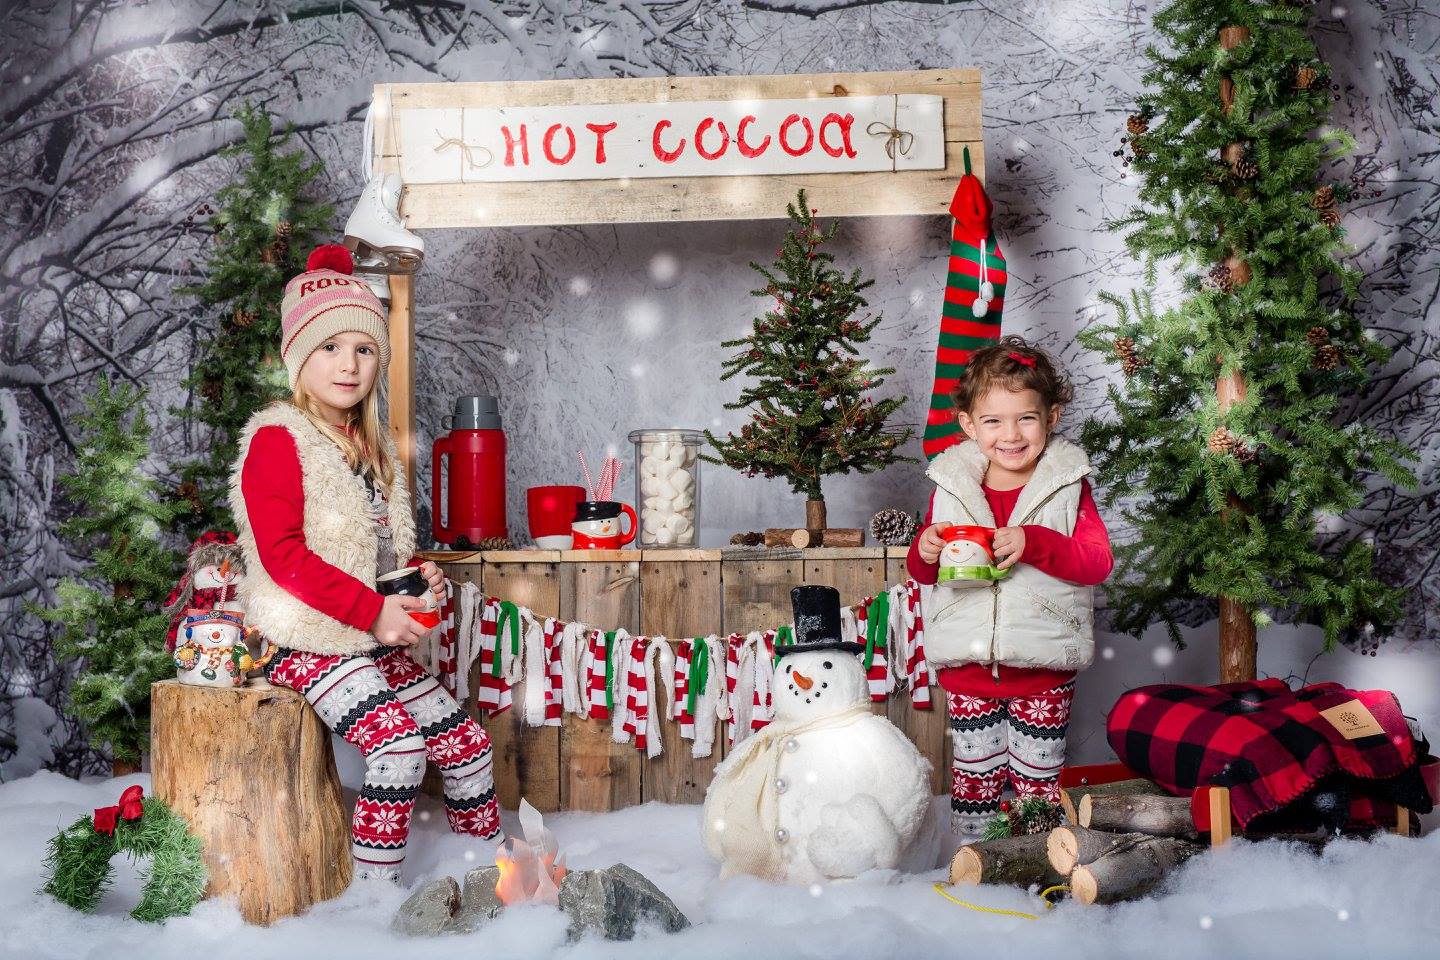 McGillivray daughters' hot cocoa stand